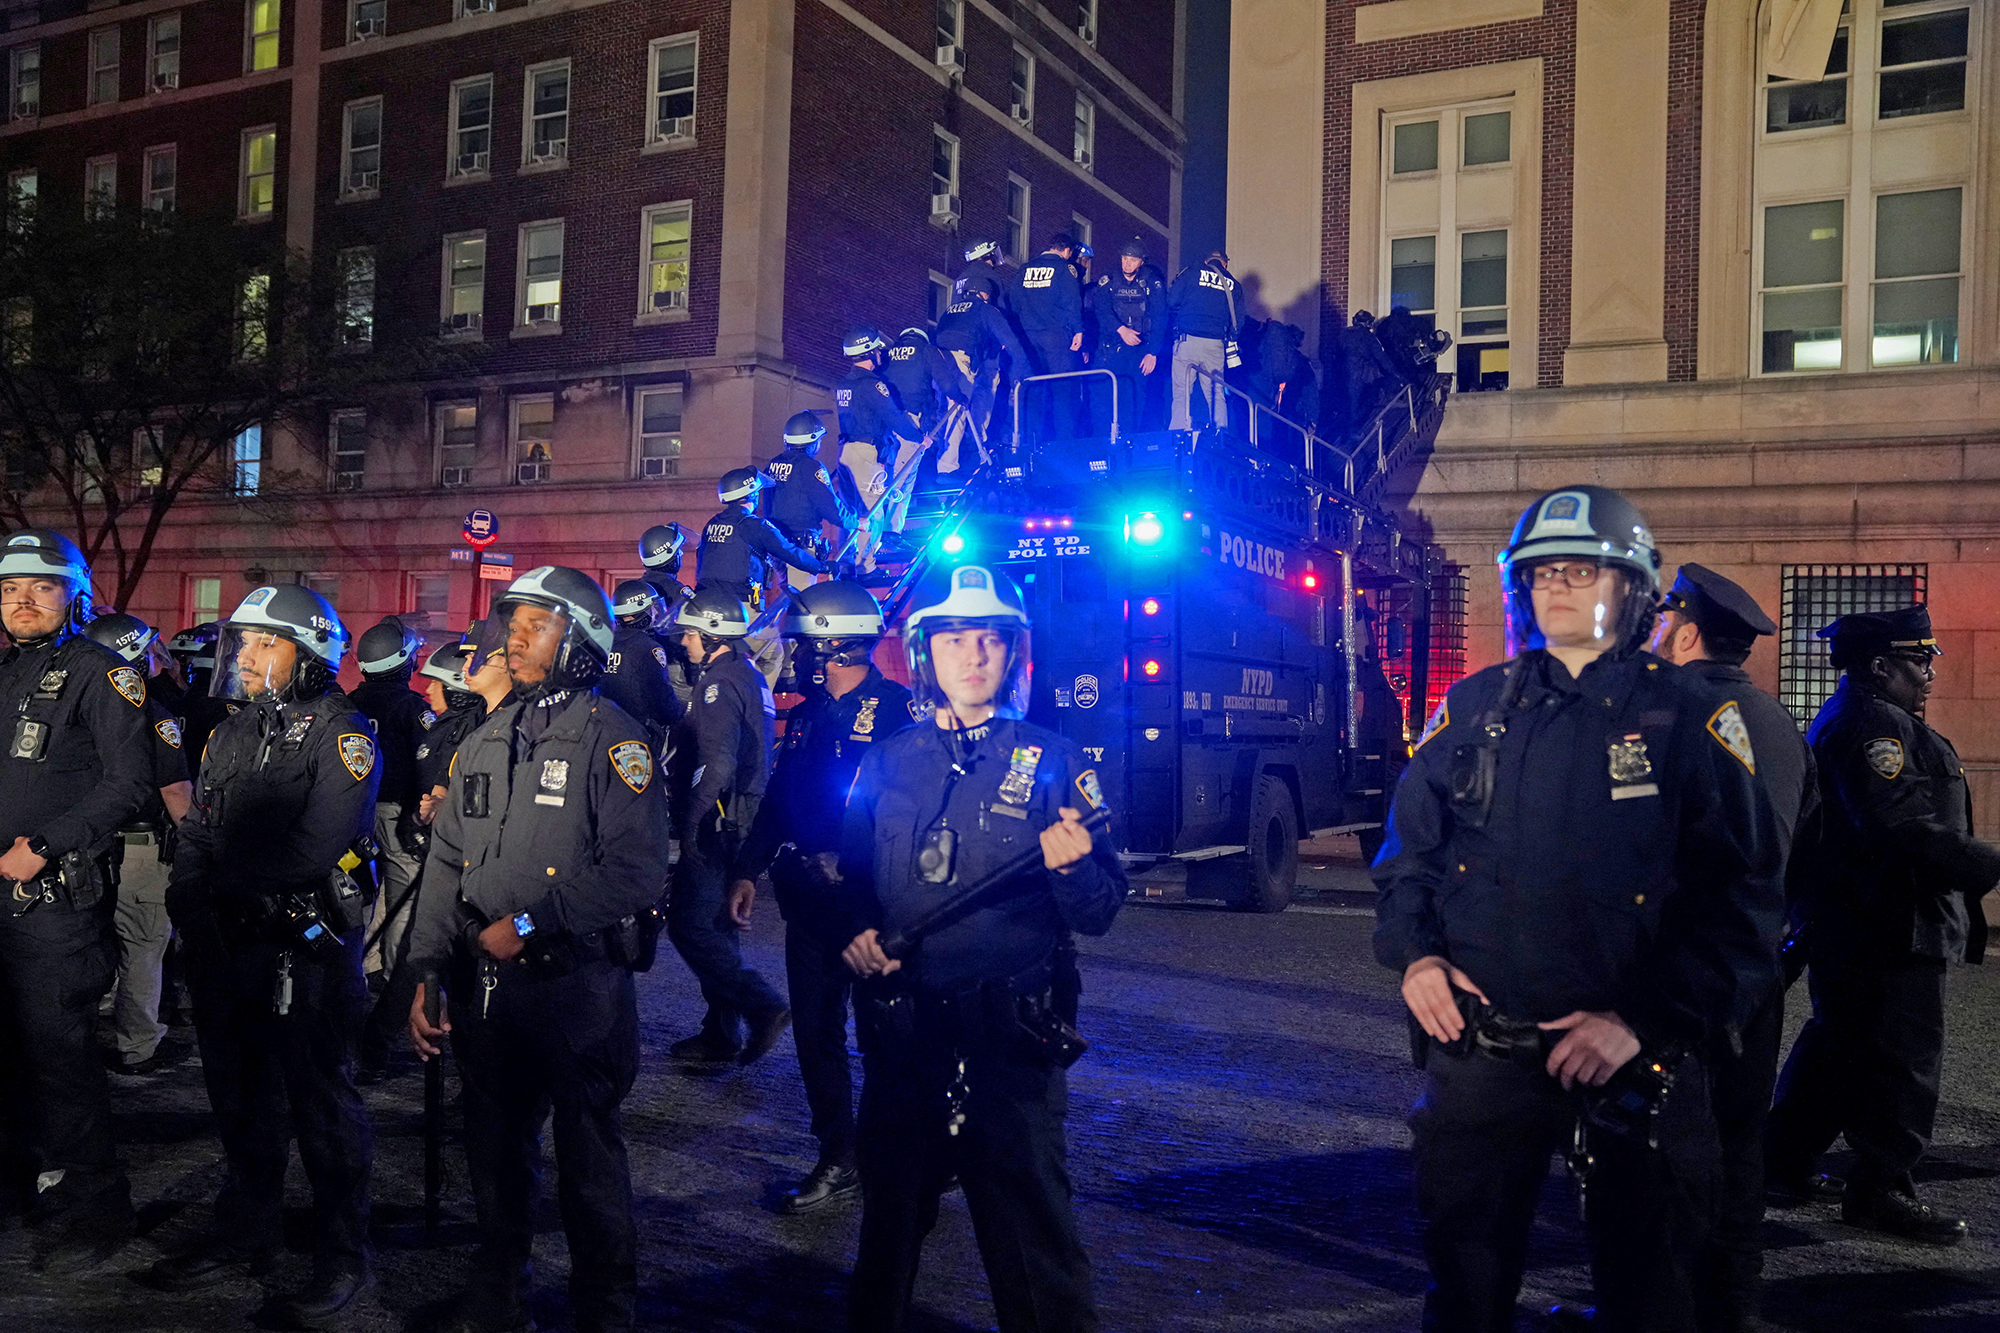 Police use a special vehicle to enter Hamilton Hall which protesters occupied in New York City, on April 30.